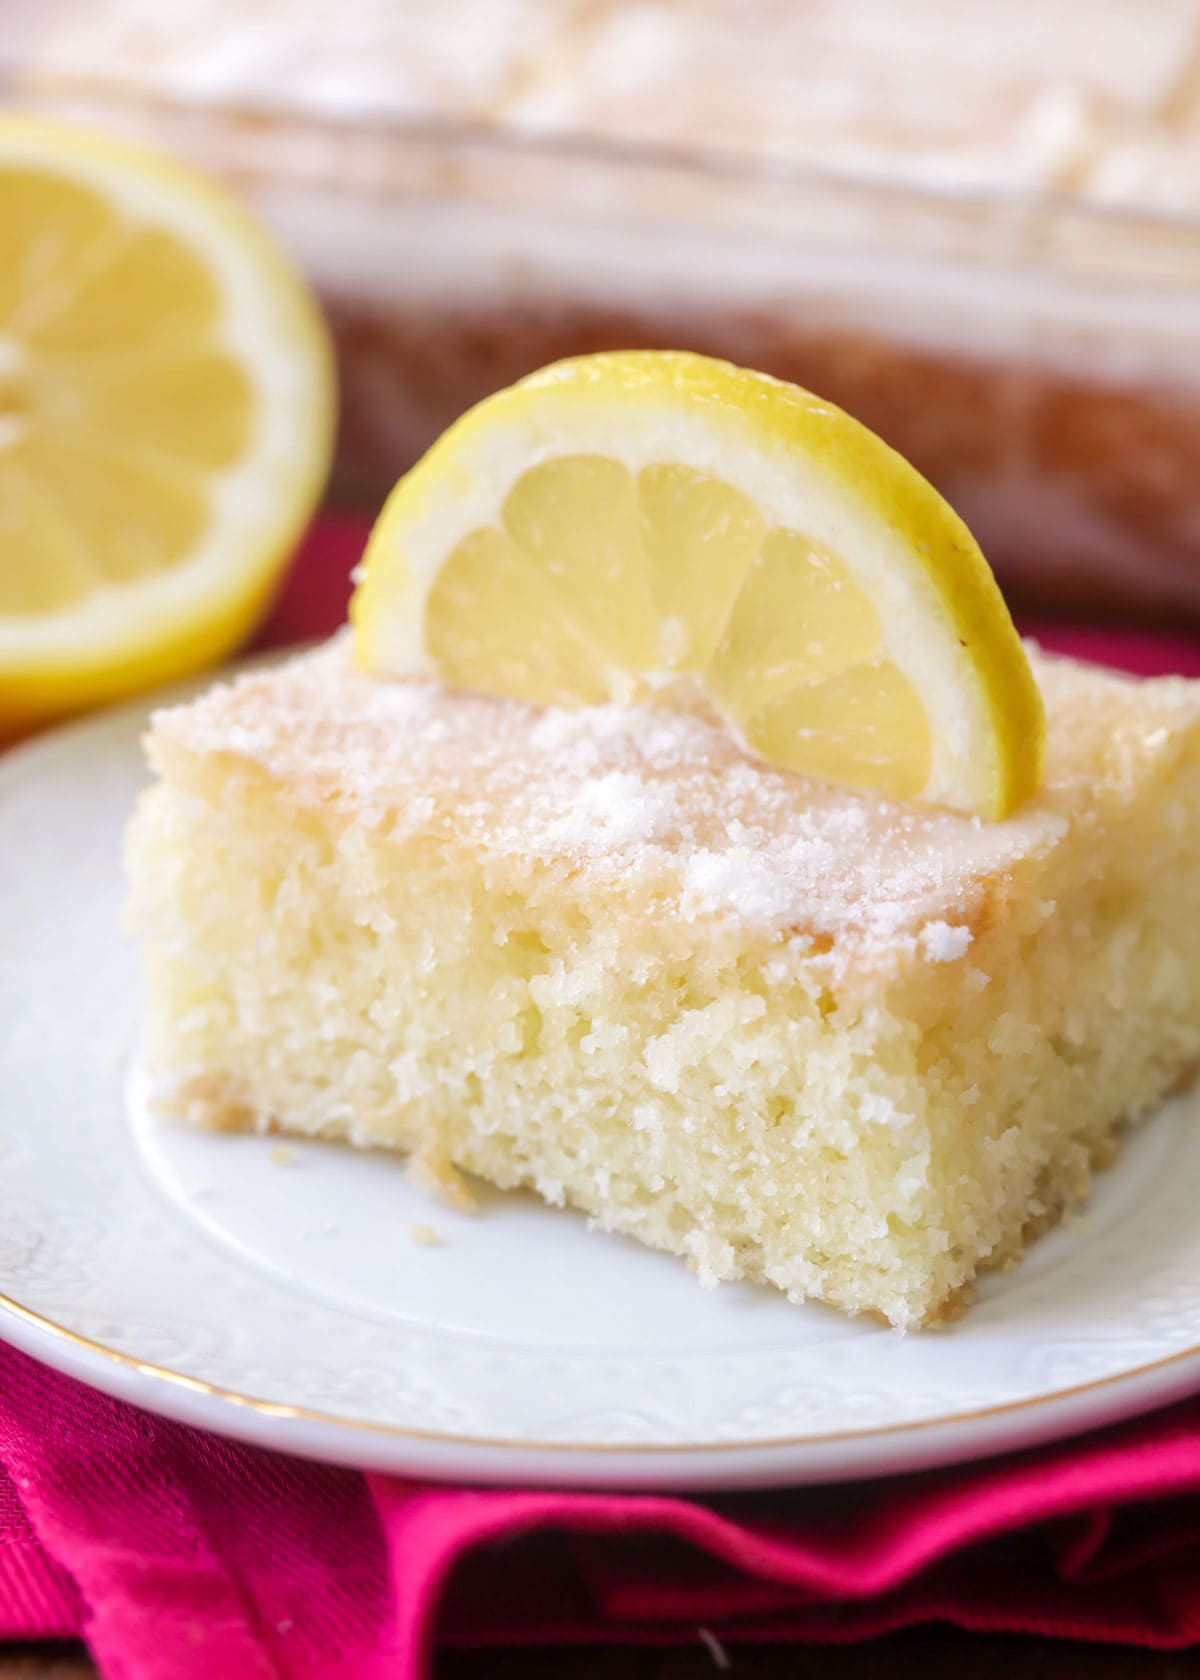 Lemon buttermilk cake garnished with a lemon displayed on a white plate.